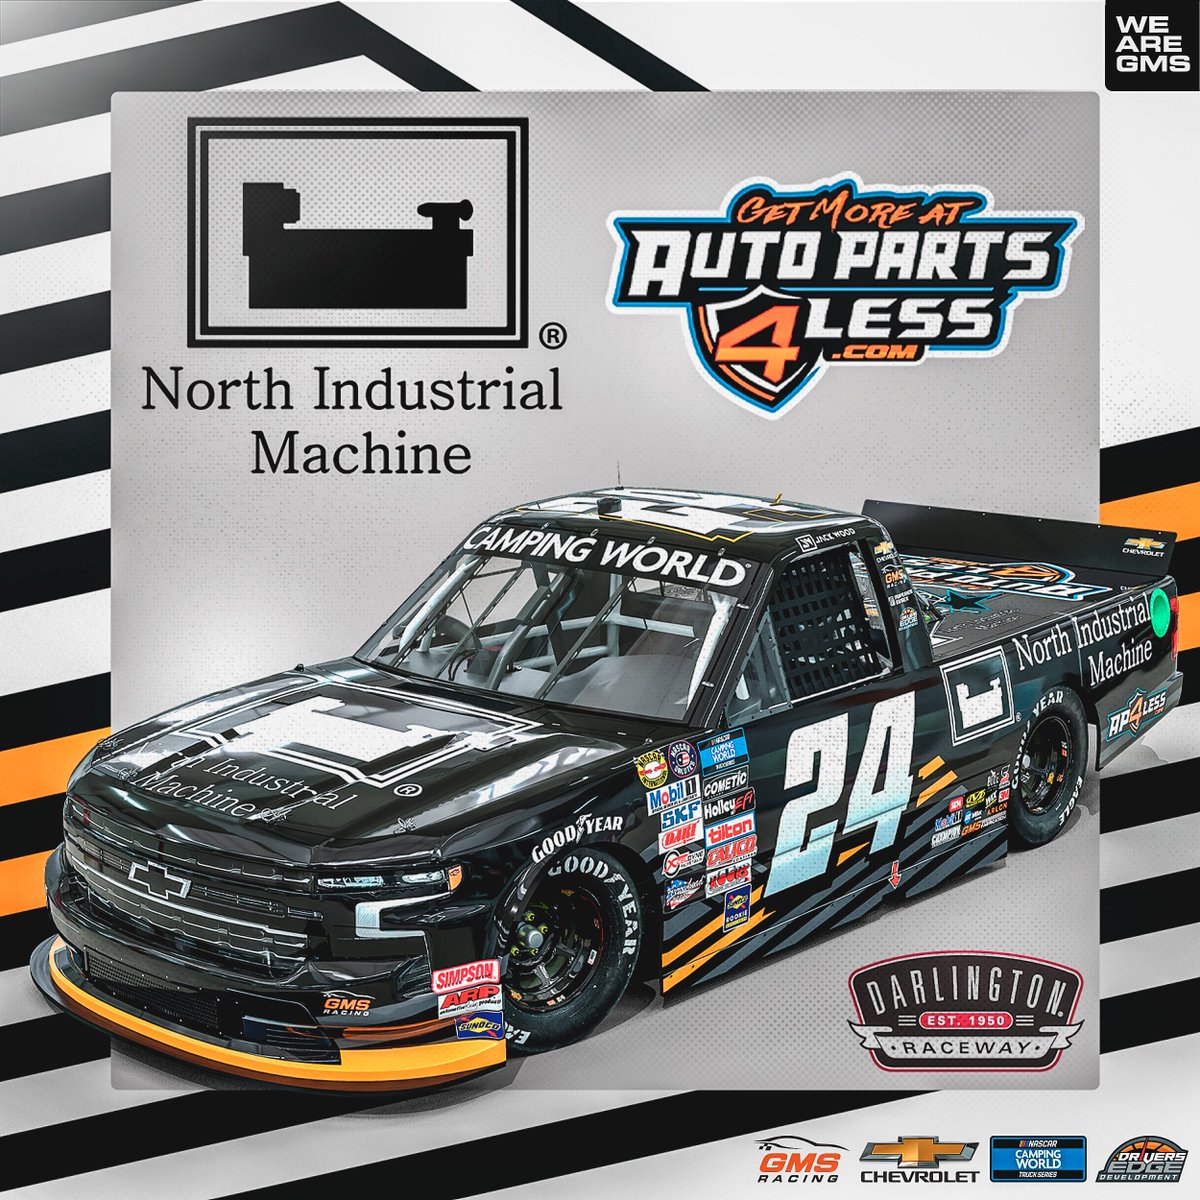 NEWS: http://NIMachine.net and @AutoParts4_less join forces with @DriverJackWood at @TooToughToTame this weekend!

💻: https://www.gmsracing.net/news/auto-parts-4less-and-north-industrial-machine-join-forces-with-jack-wood-at-darlington-raceway

#WeAreGMS | #NASCAR | #TeamChevy 